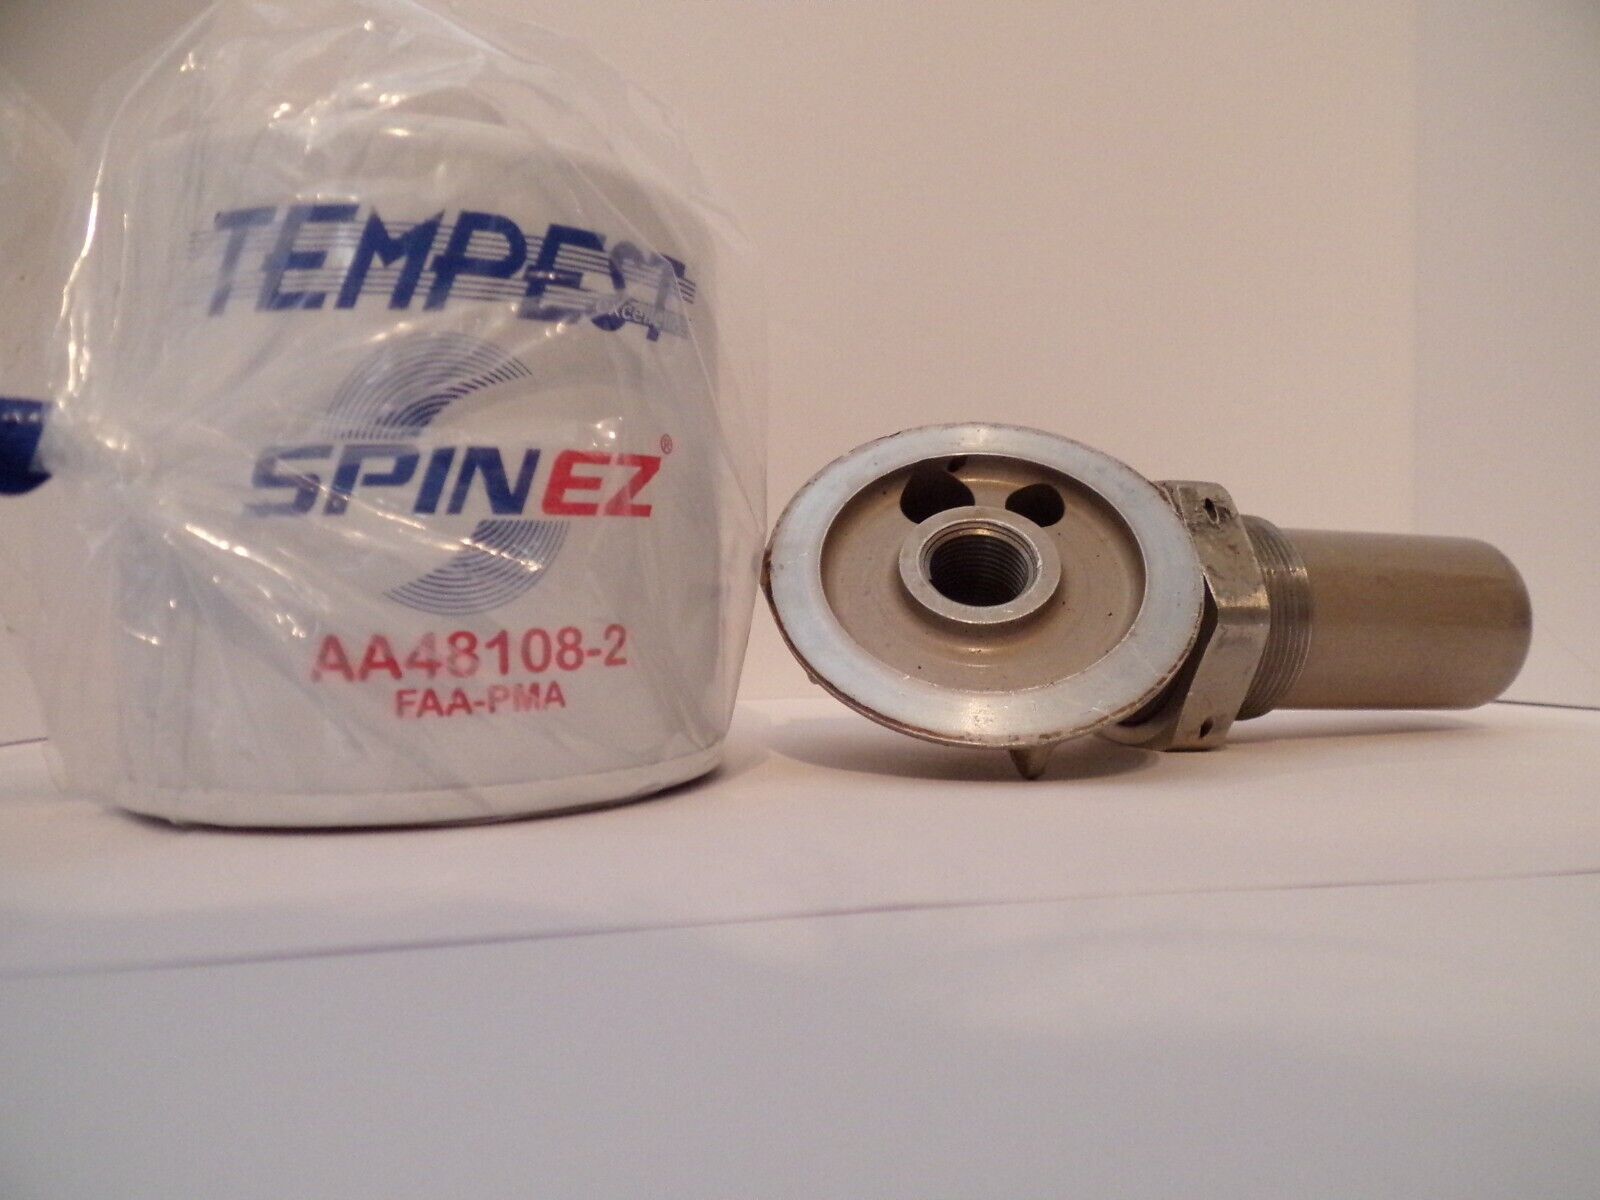 Cessna 150 oil filter adapter with one new filter